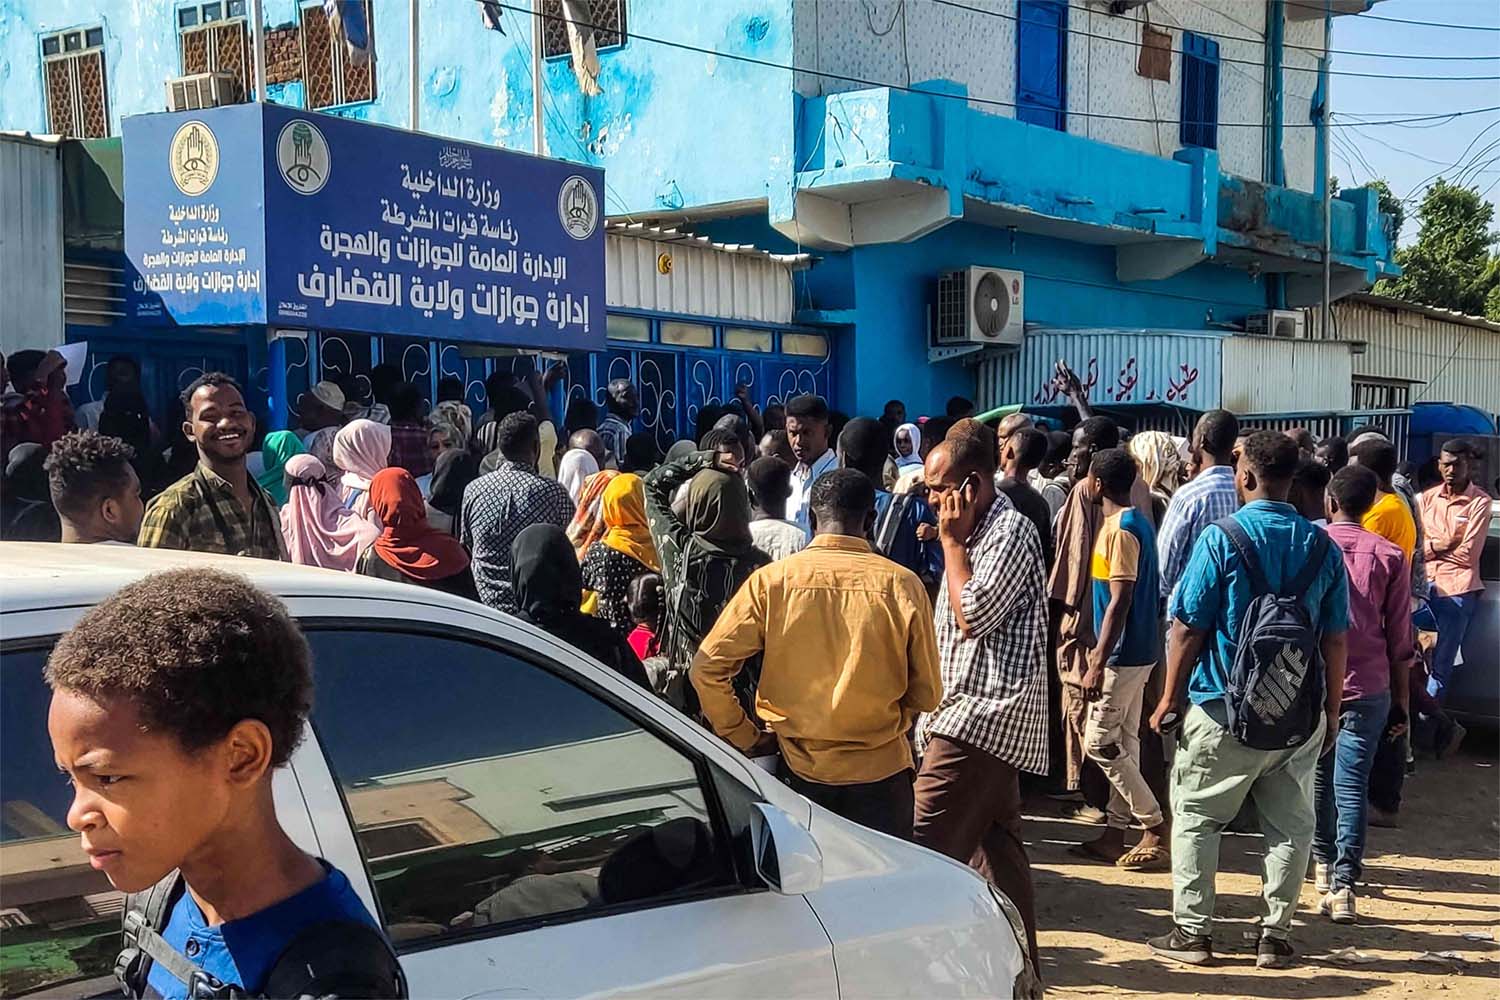 People displaced by war in Sudan gather outside a passport office in city of Gedaref as they attempt to get passports and exit visas after fleeing flee Wad Madani